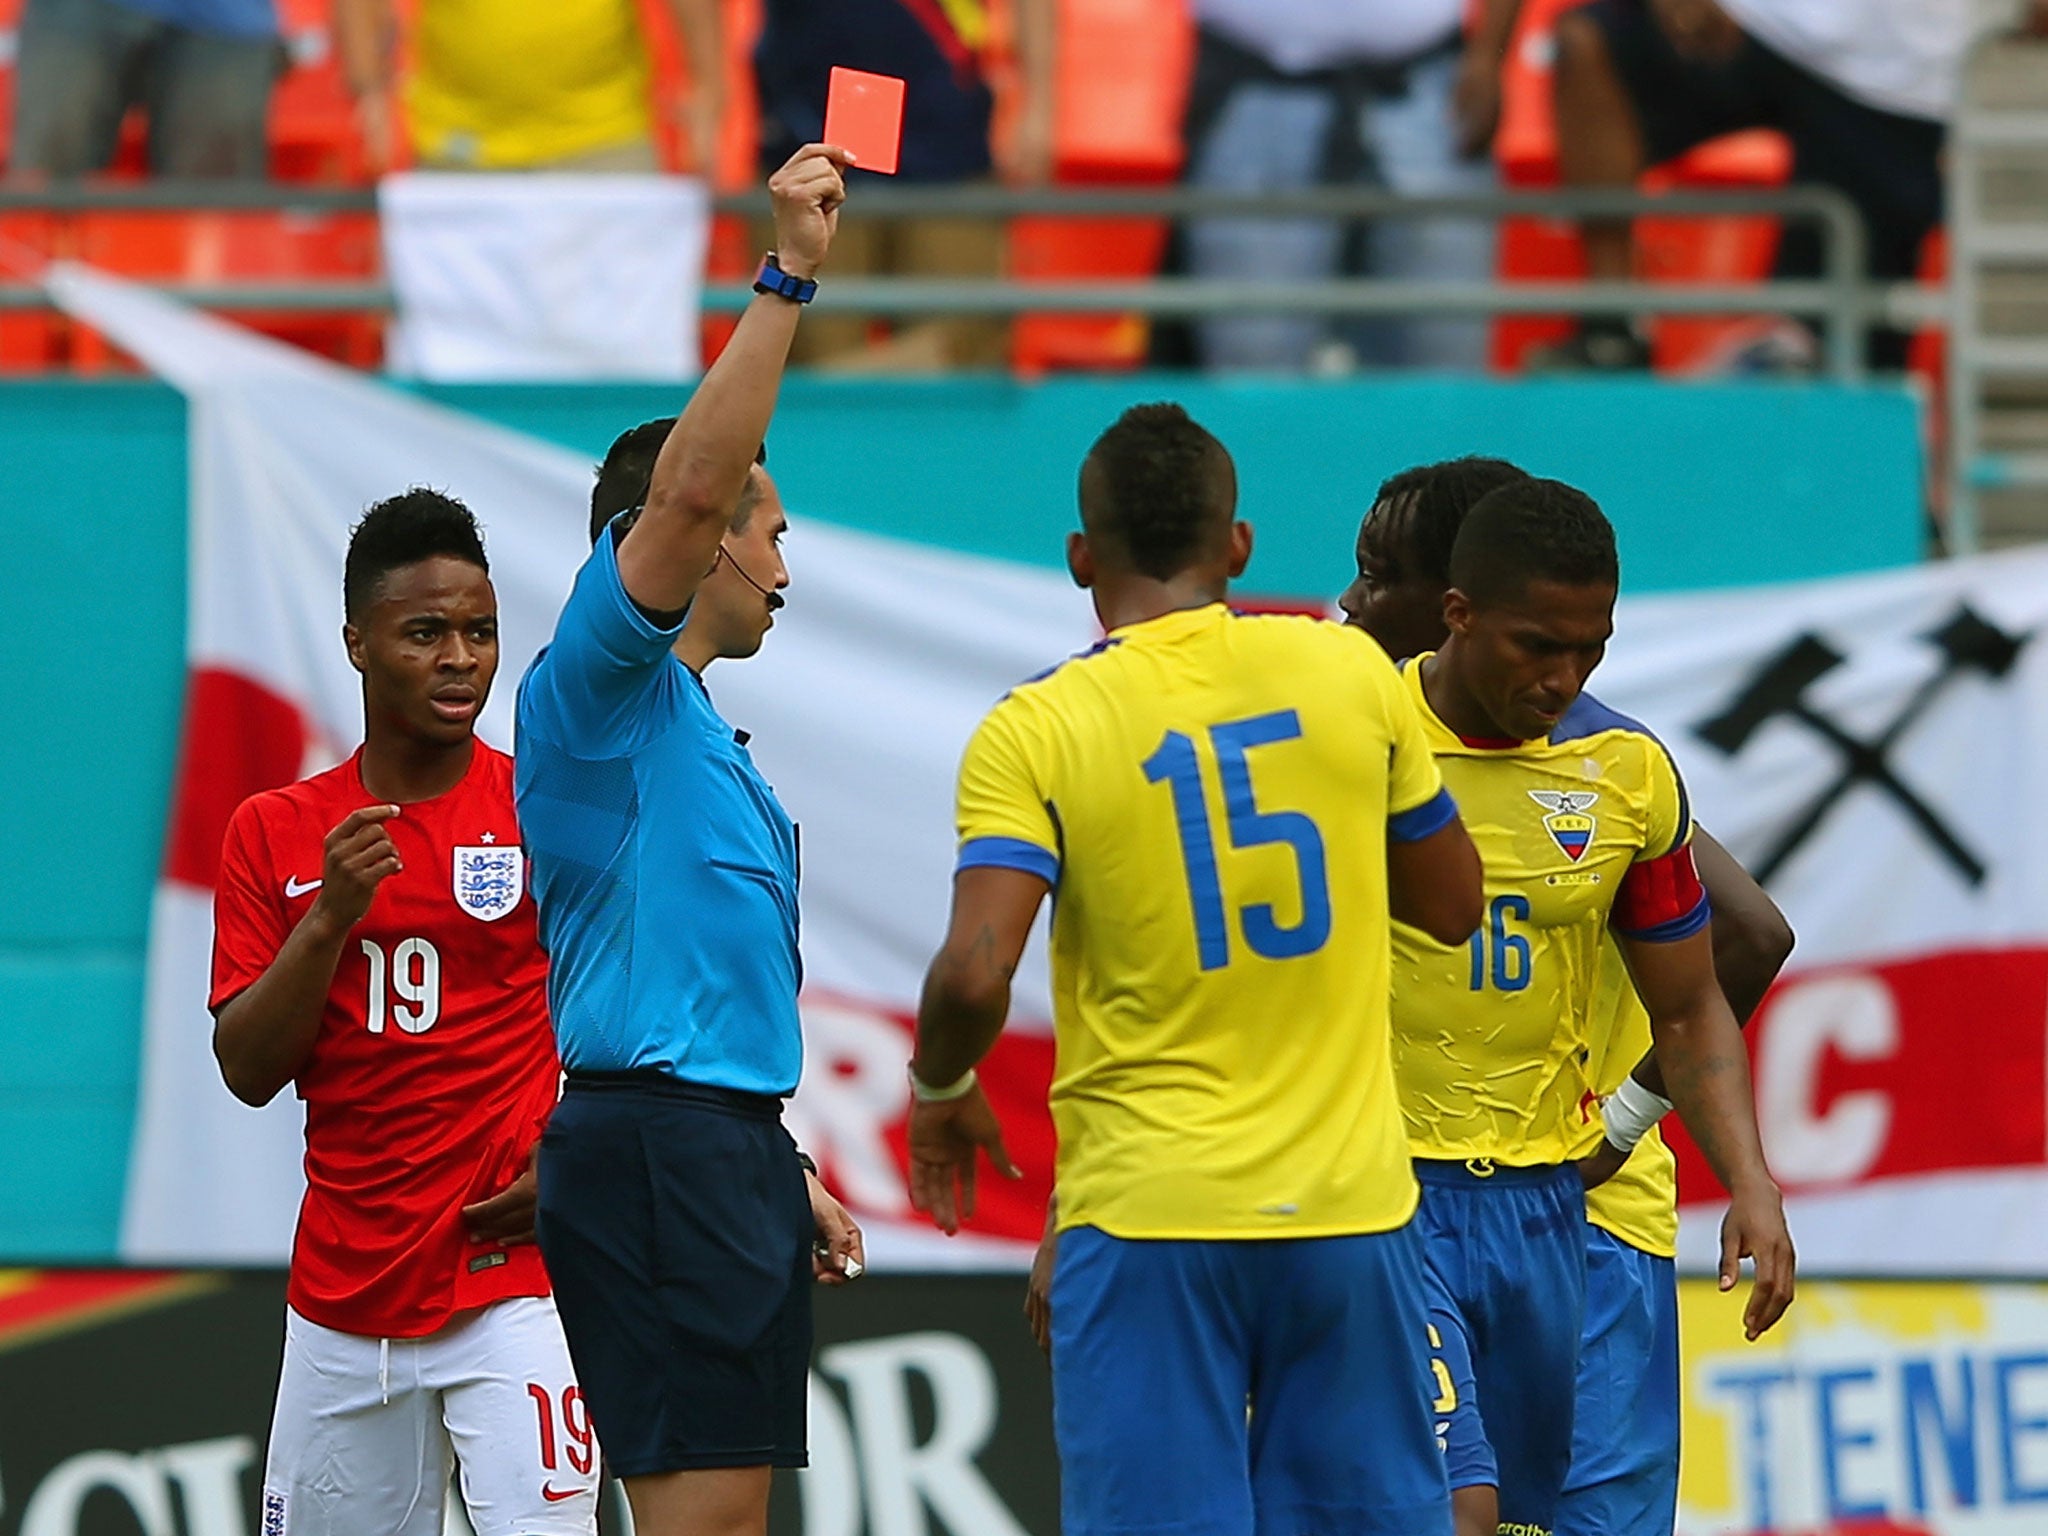 Antonio Valencia is shown a red card for his reaction to Raheem Sterling's (L) tackle, who was also sent off in the 2-2 draw between England and Ecuador